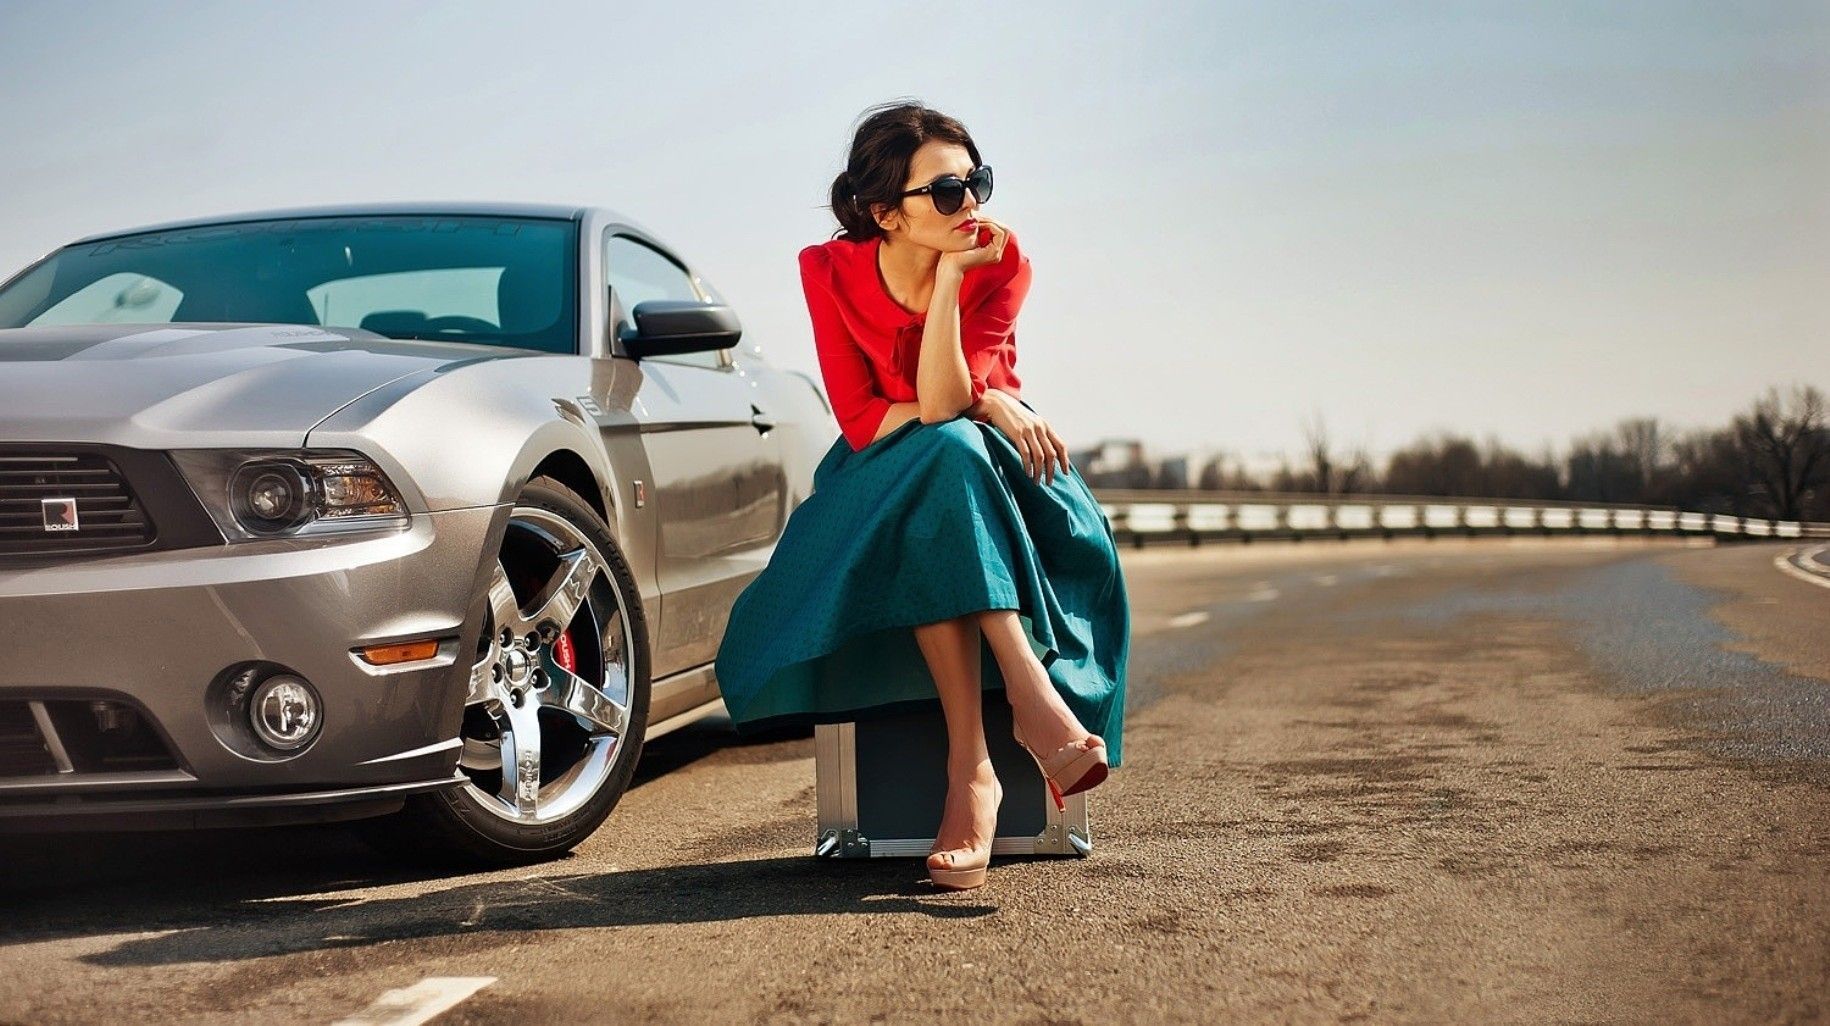 Women and Cars Wallpaper Free Women and Cars Background